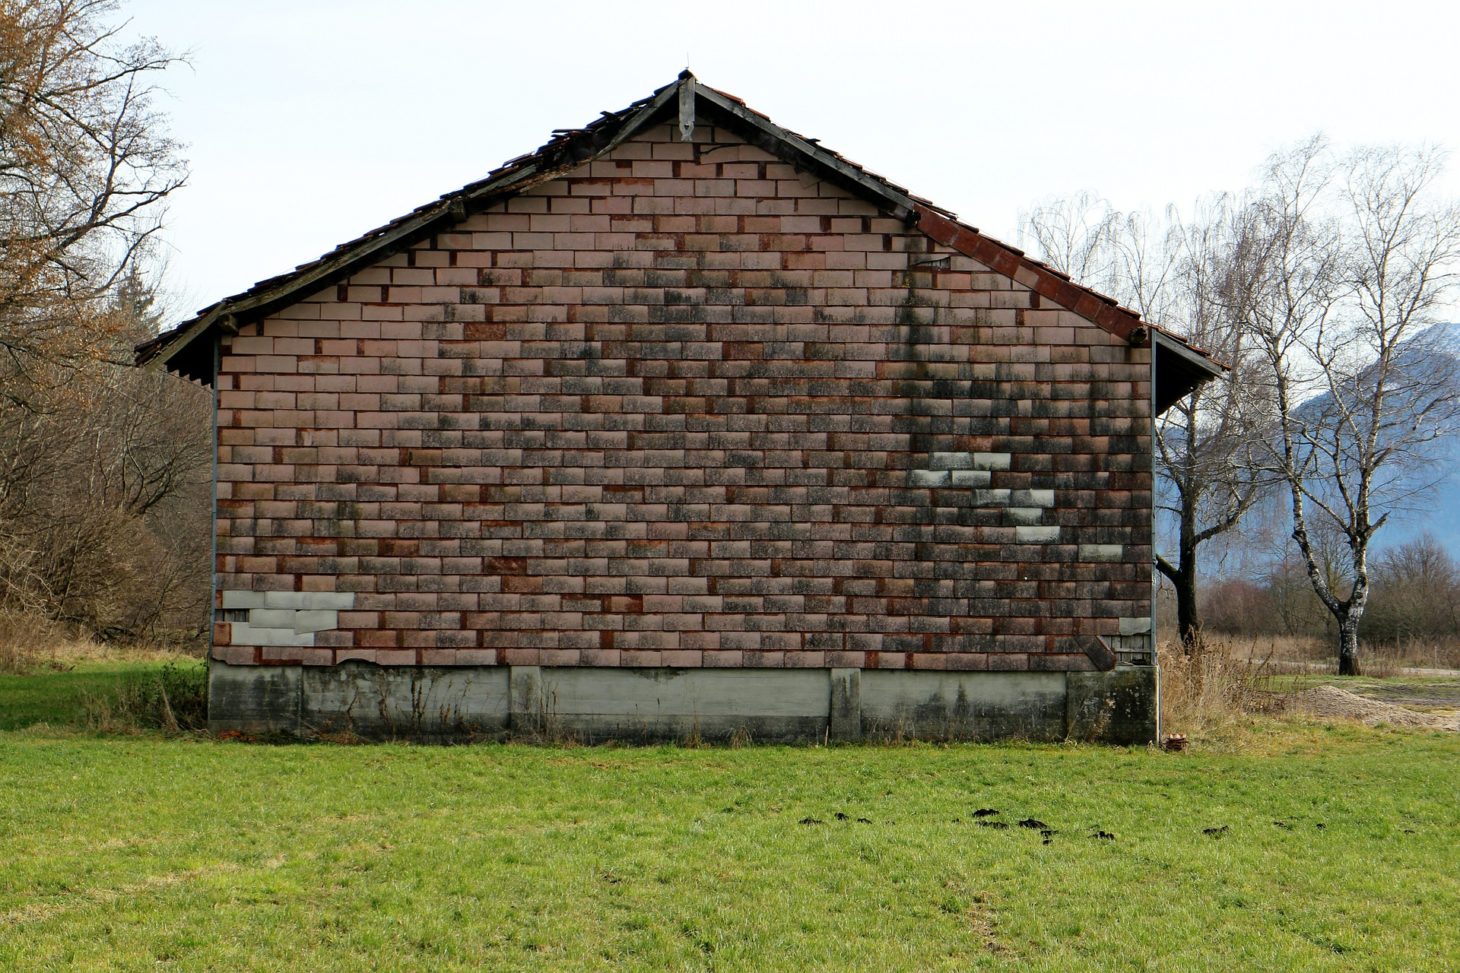 gable end of the house